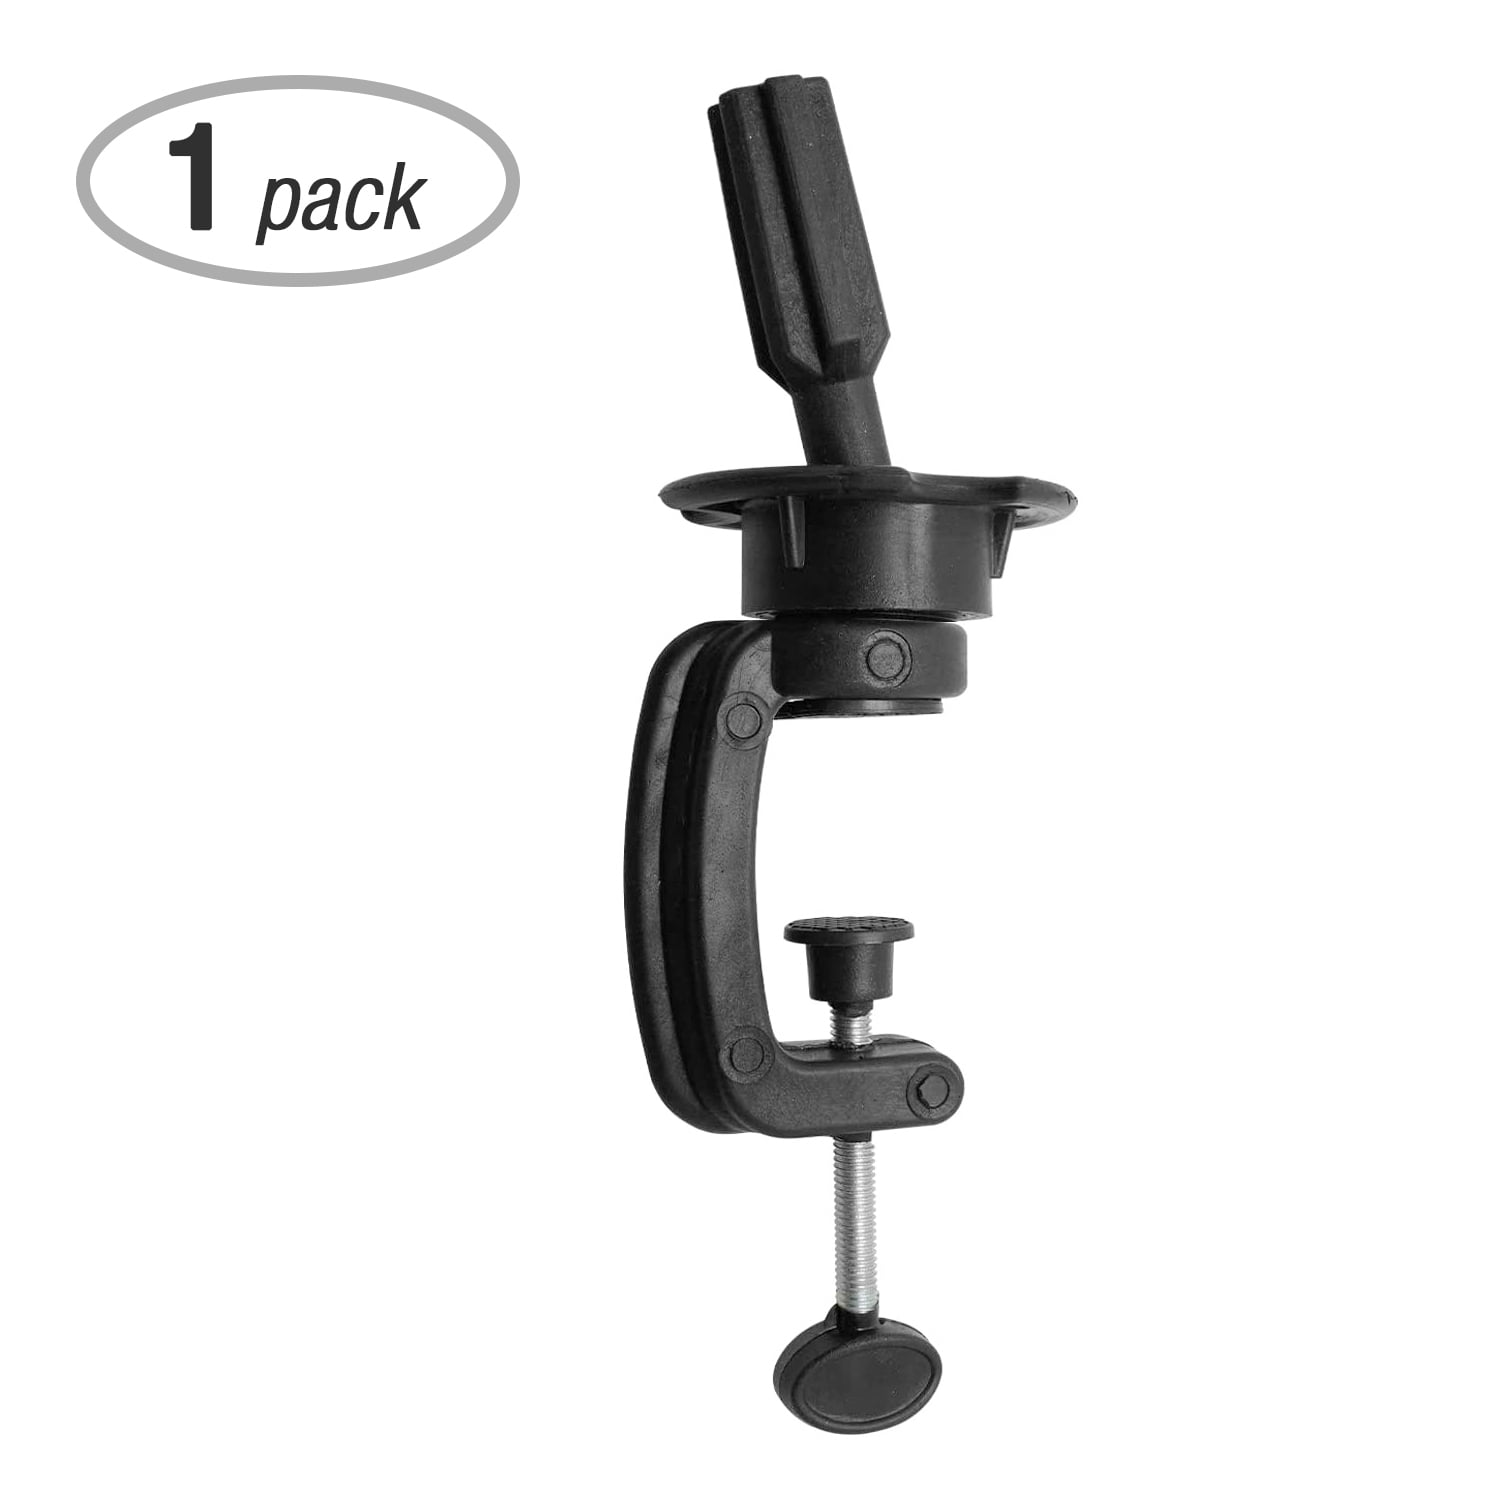 PARTYSAVING Mannequin Head Stand Clamp for Wig Making, 1 Pack, WMT1743 